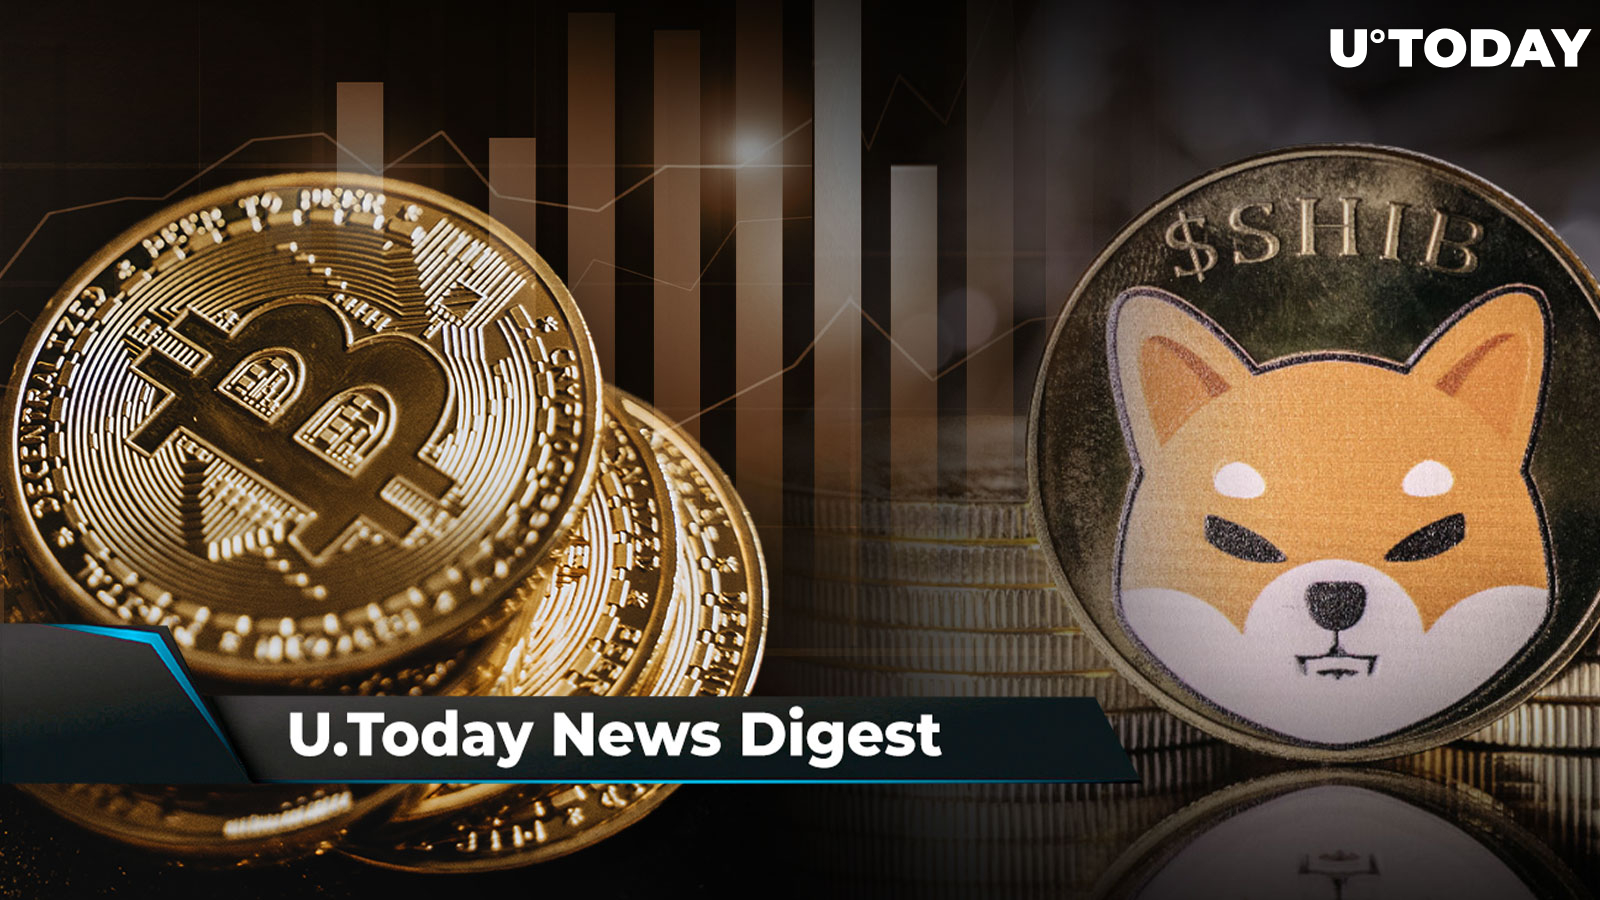 XRP Community Reacts to Security Clarity Act, BTC Prints Golden Cross, SHIB Large Transaction Volume Exceeds 1.6 Trillion SHIB: Crypto News Digest by U.Today